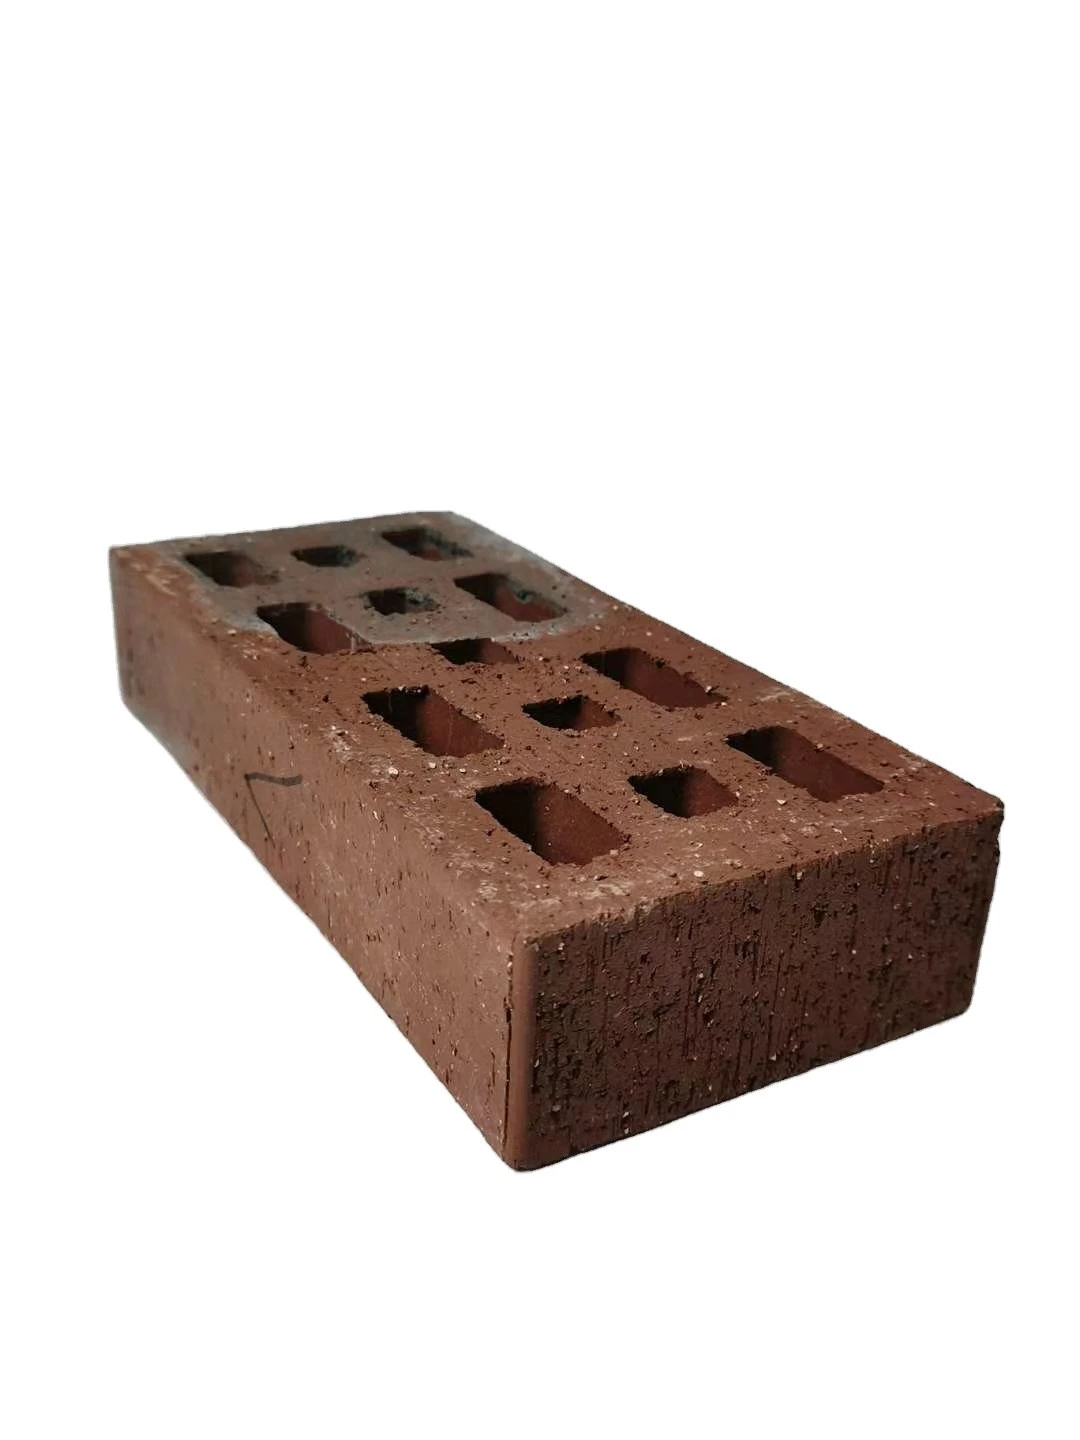 Hot selling classic old red wall brick